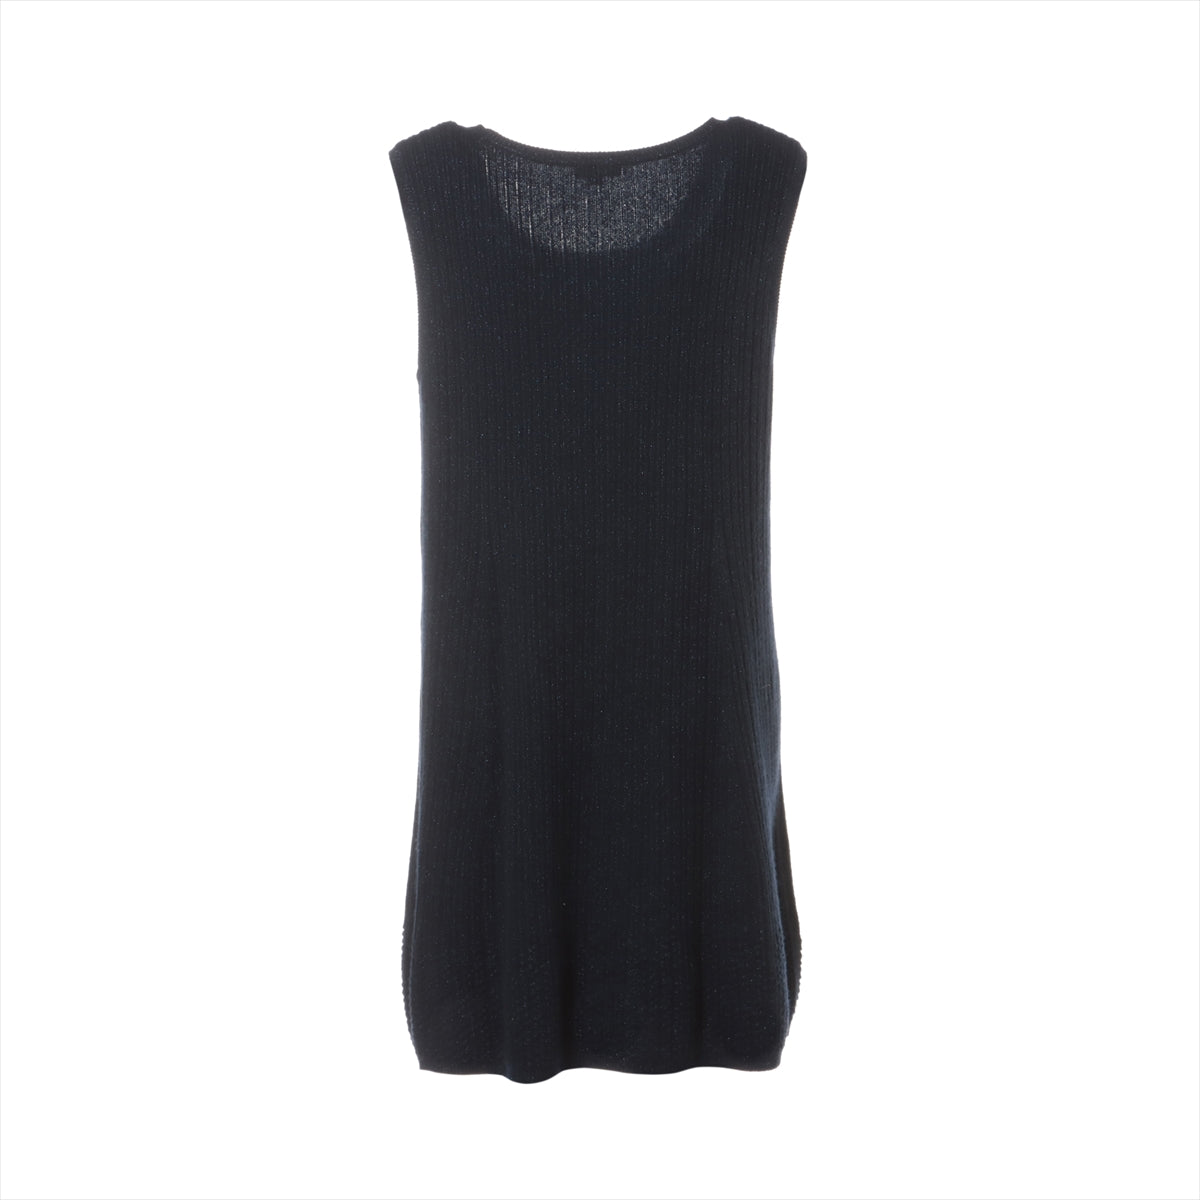 Chanel Coco Mark P58 Cashmere x polyester Knit dress 38 Ladies' Navy Blue  Sleeveless